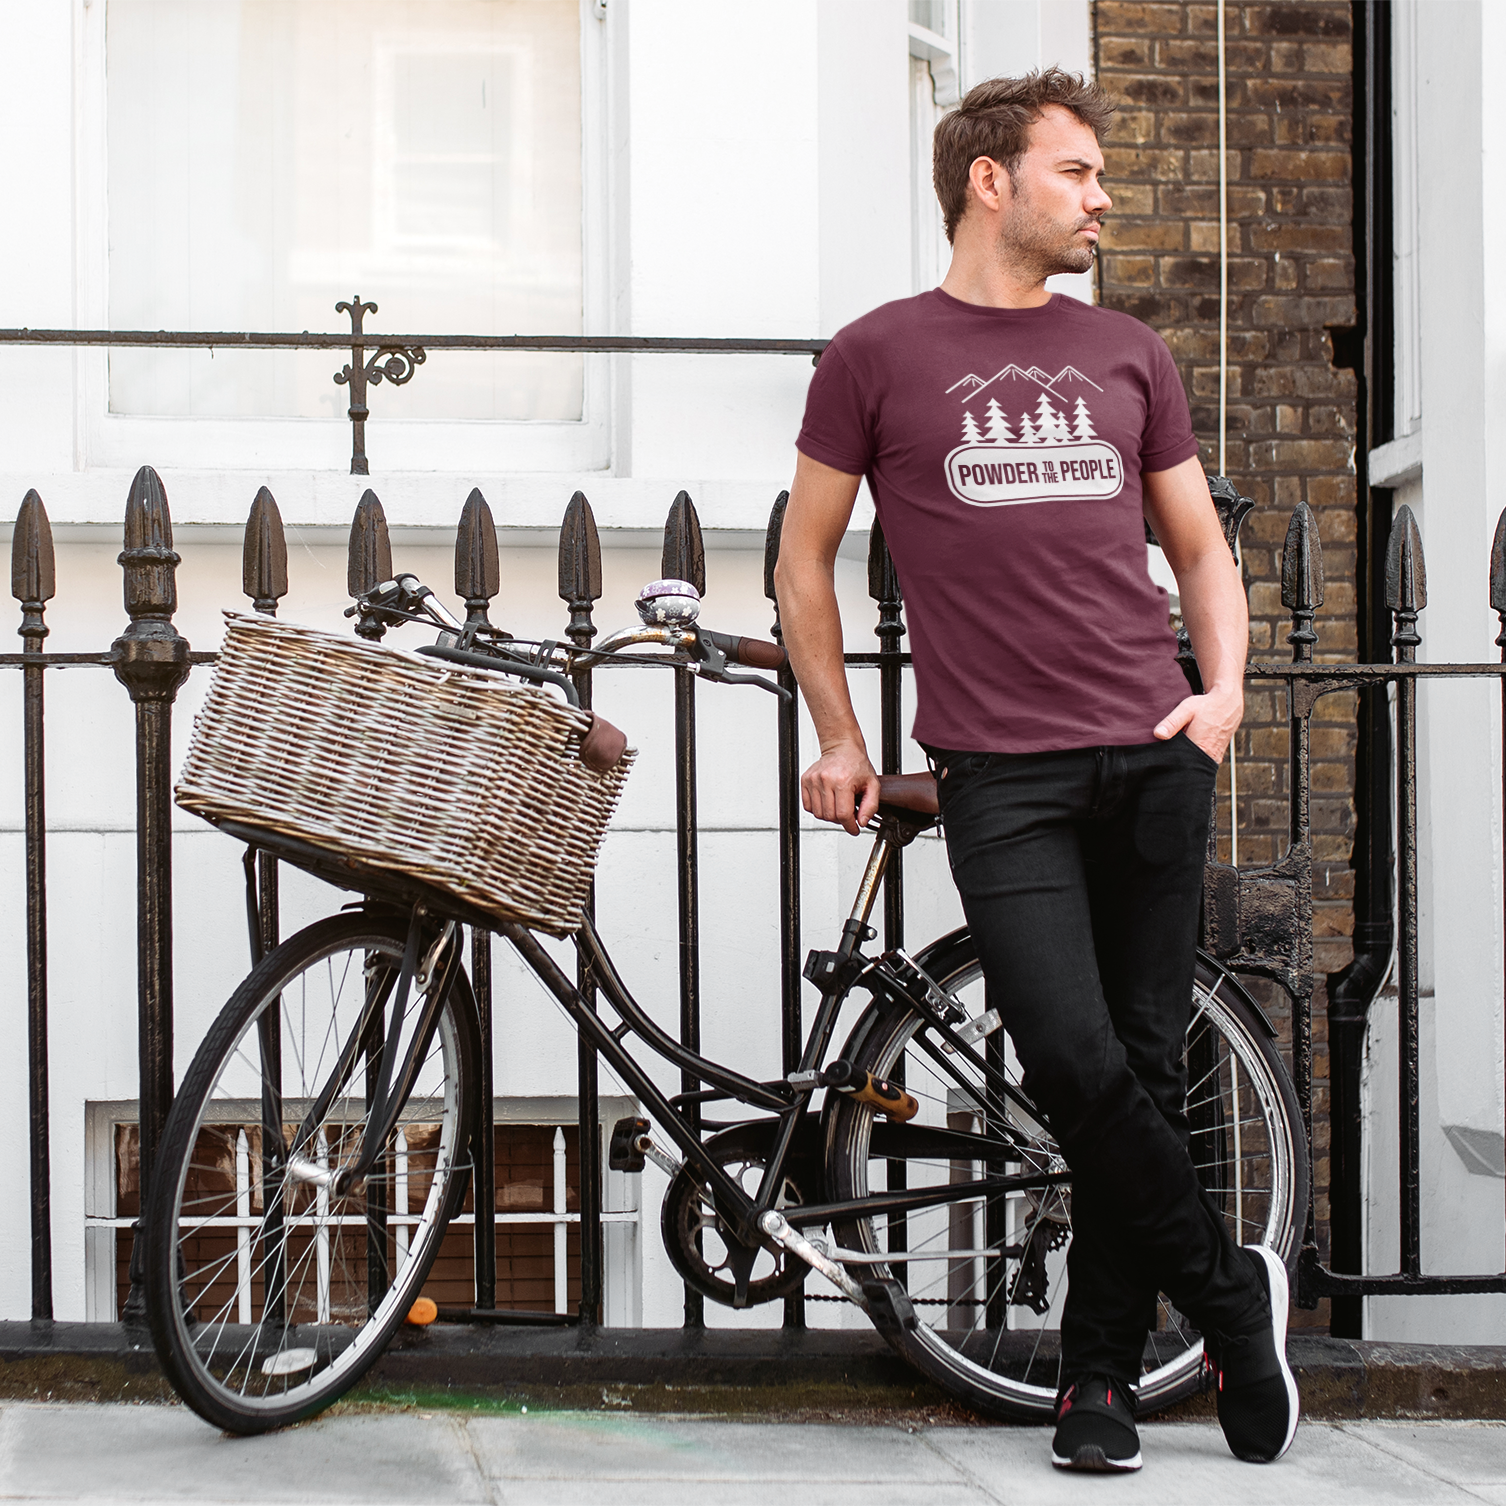 Man with bike, wearing burgundy shirt with 'Powder to the people' print by KMLeon.